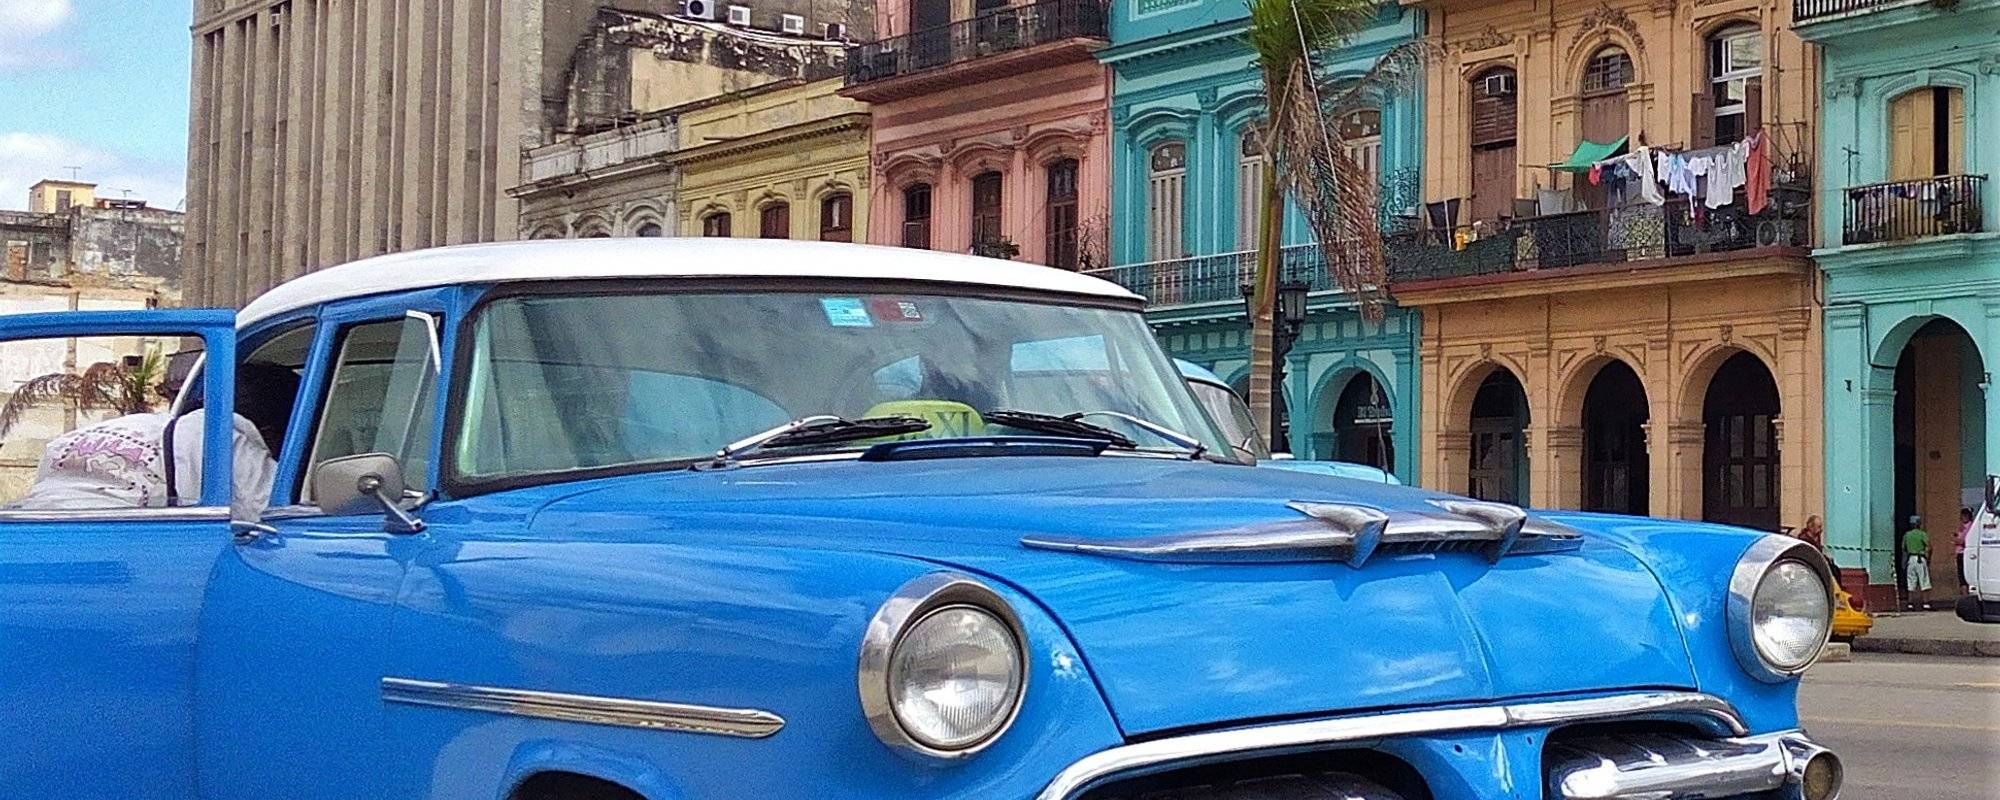 Beauties of Cuba: my ultimate photo collection of classic American cars